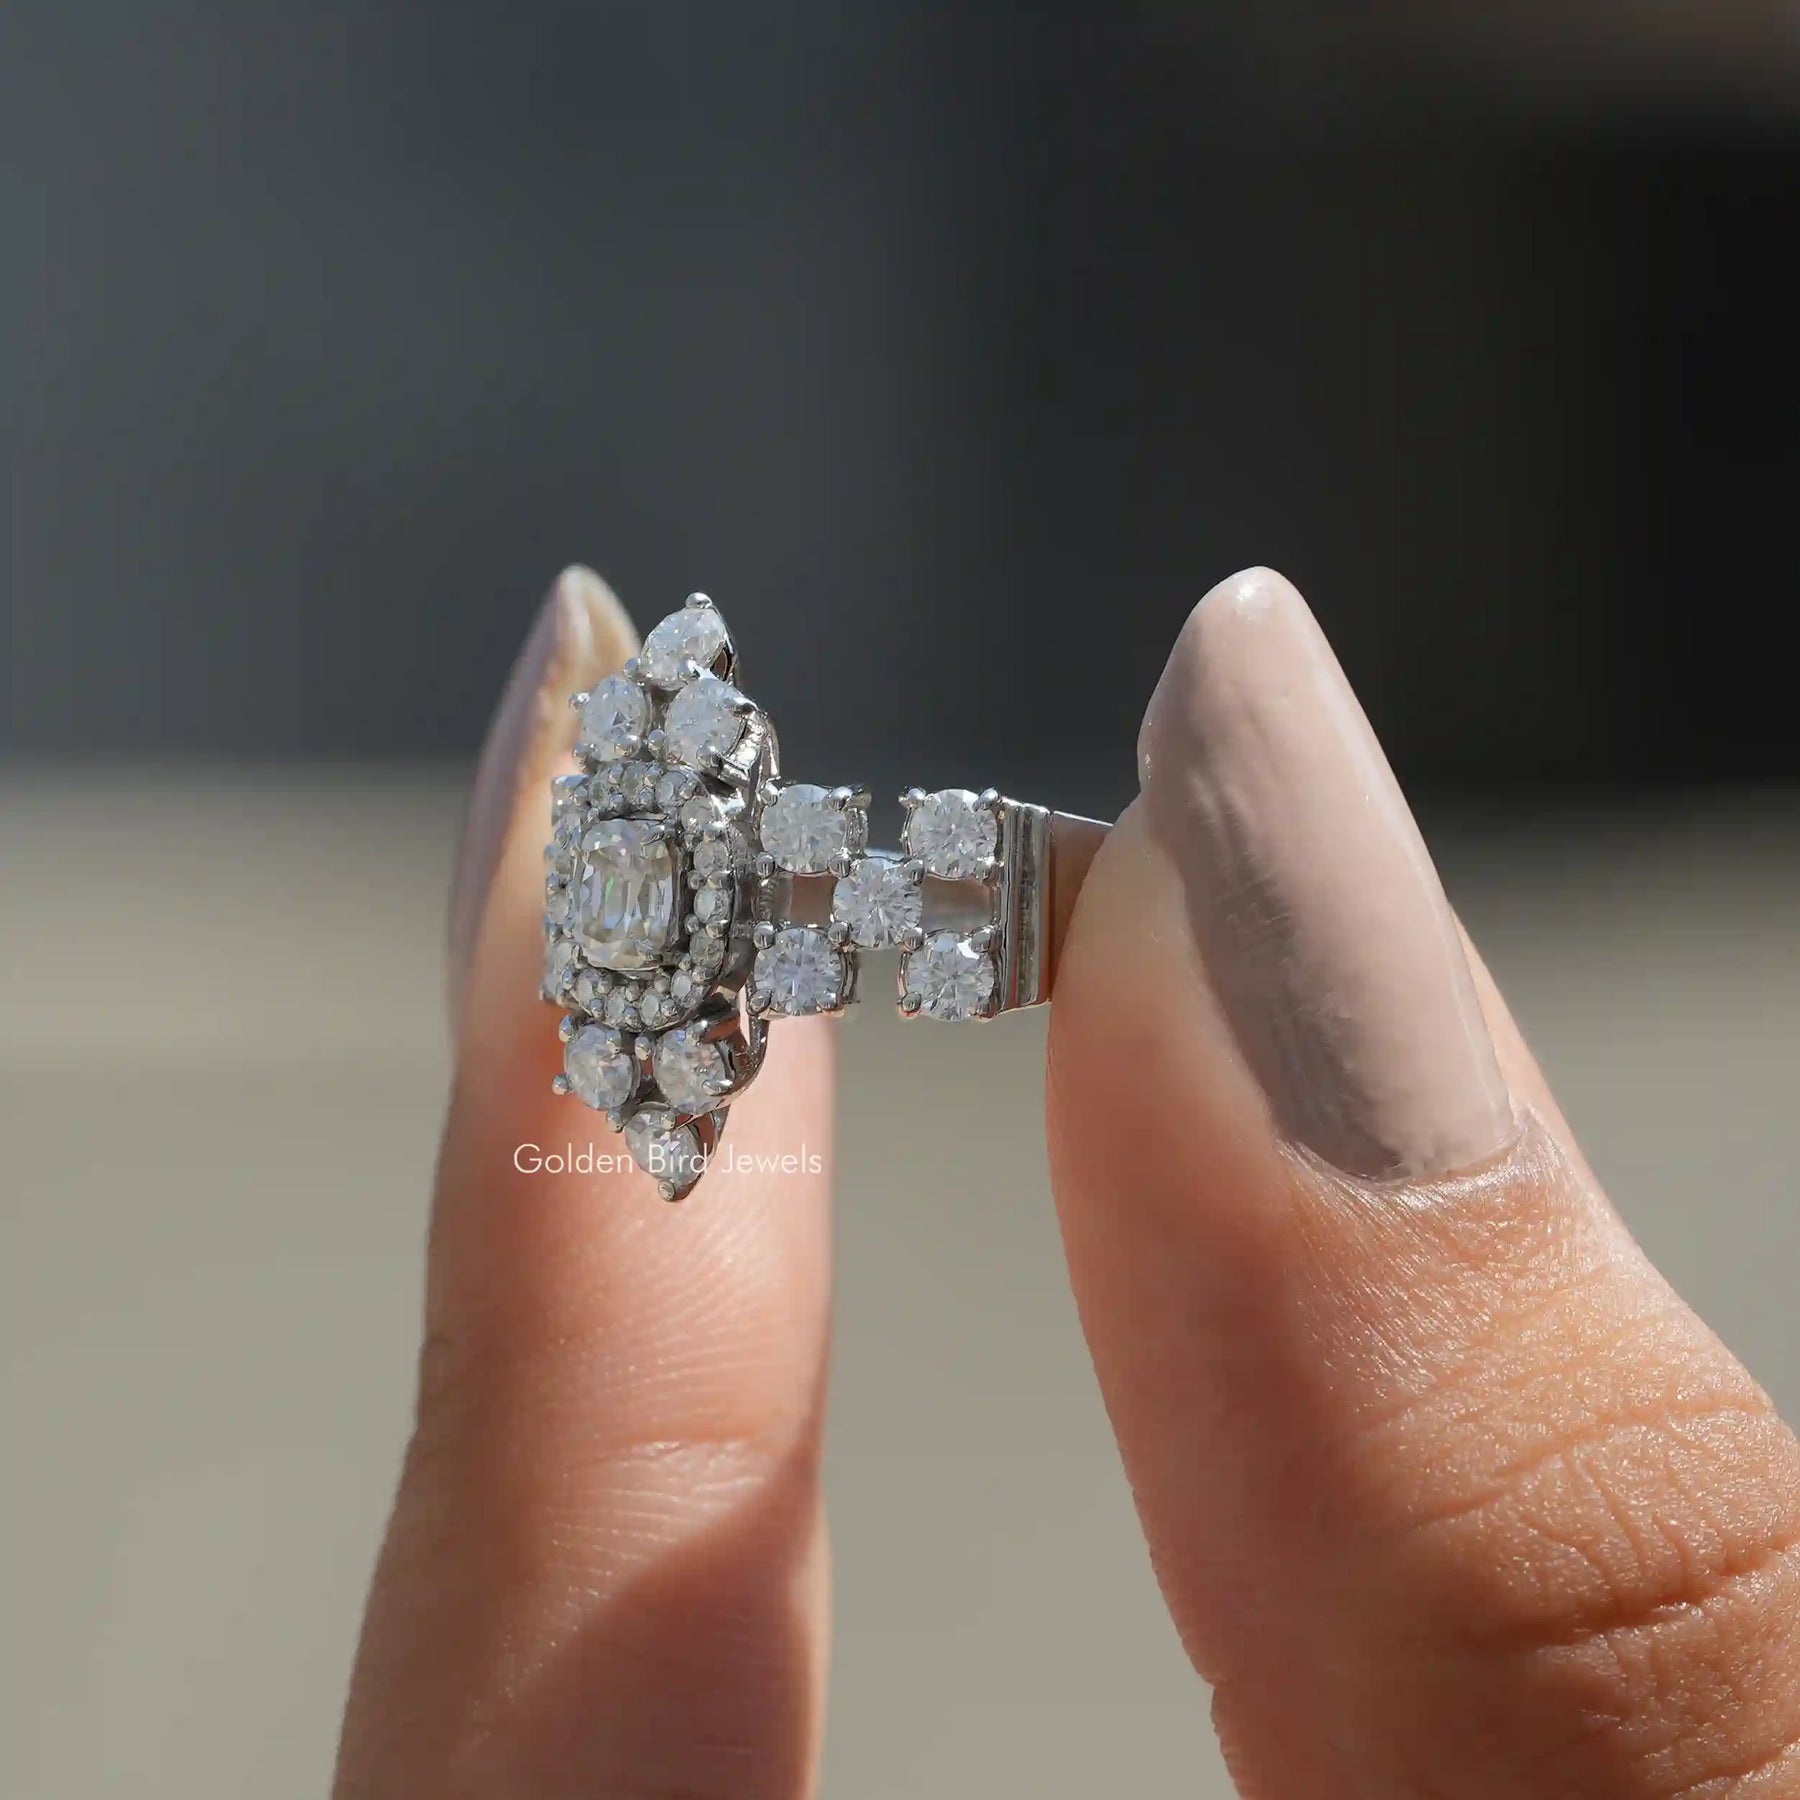 [Moissanite Cushion Cut Vintage Style Cluster Anniversary Ring]-[Golden Bird Jewels]